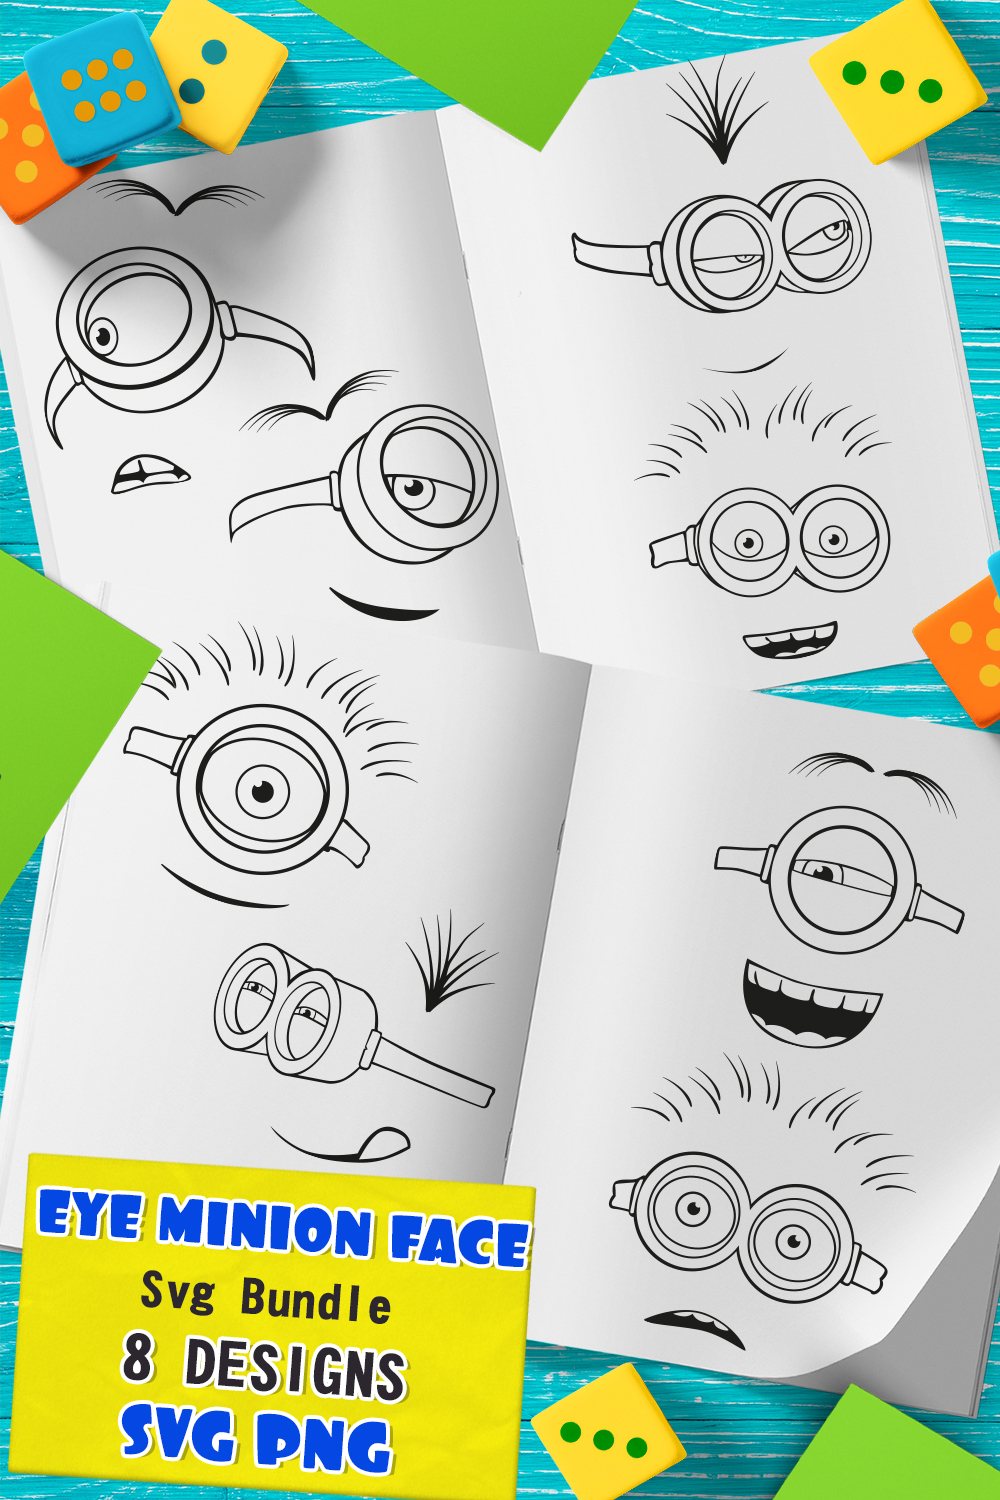 Cool pictures with minions.